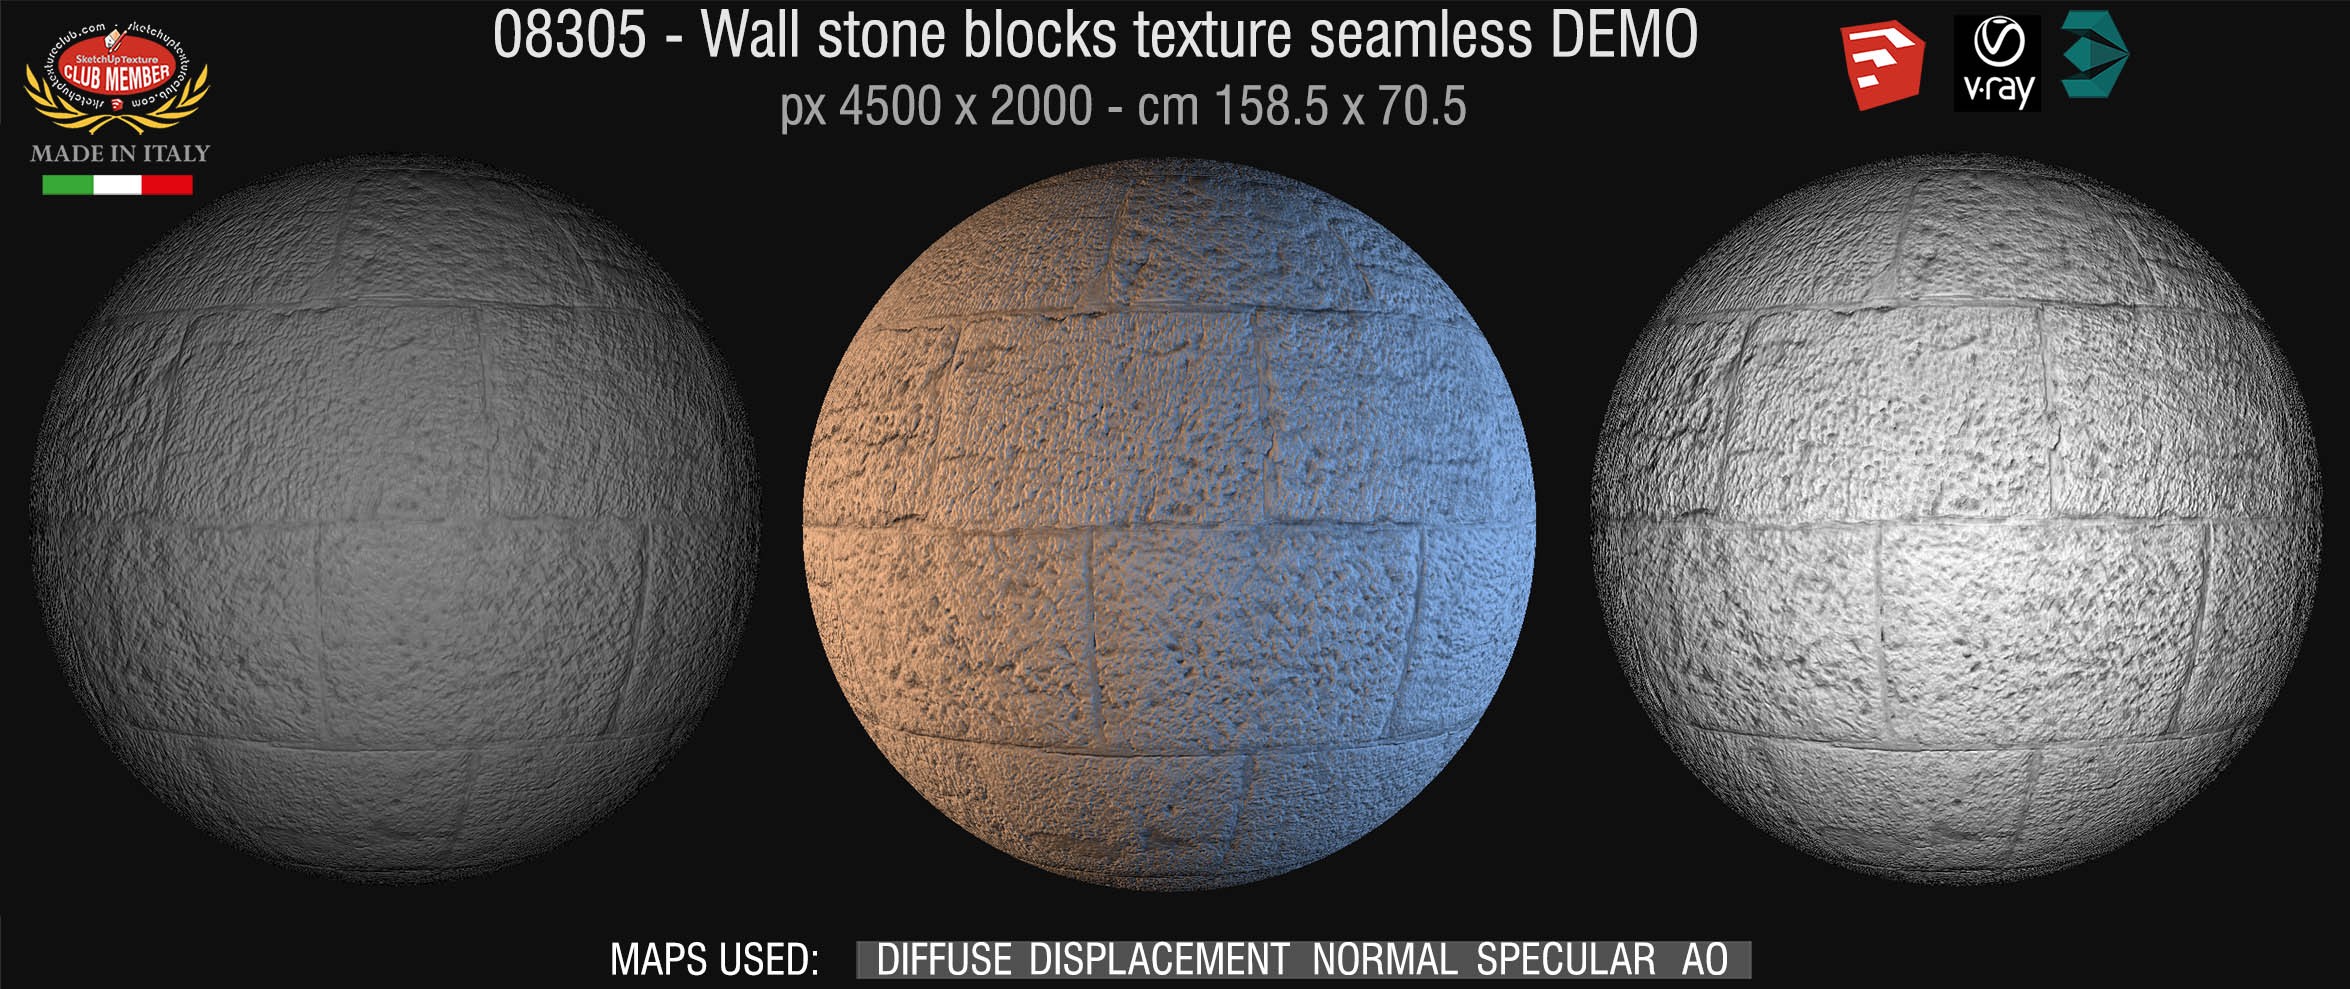 08305 HR Wall stone with regular blocks texture + maps DEMO